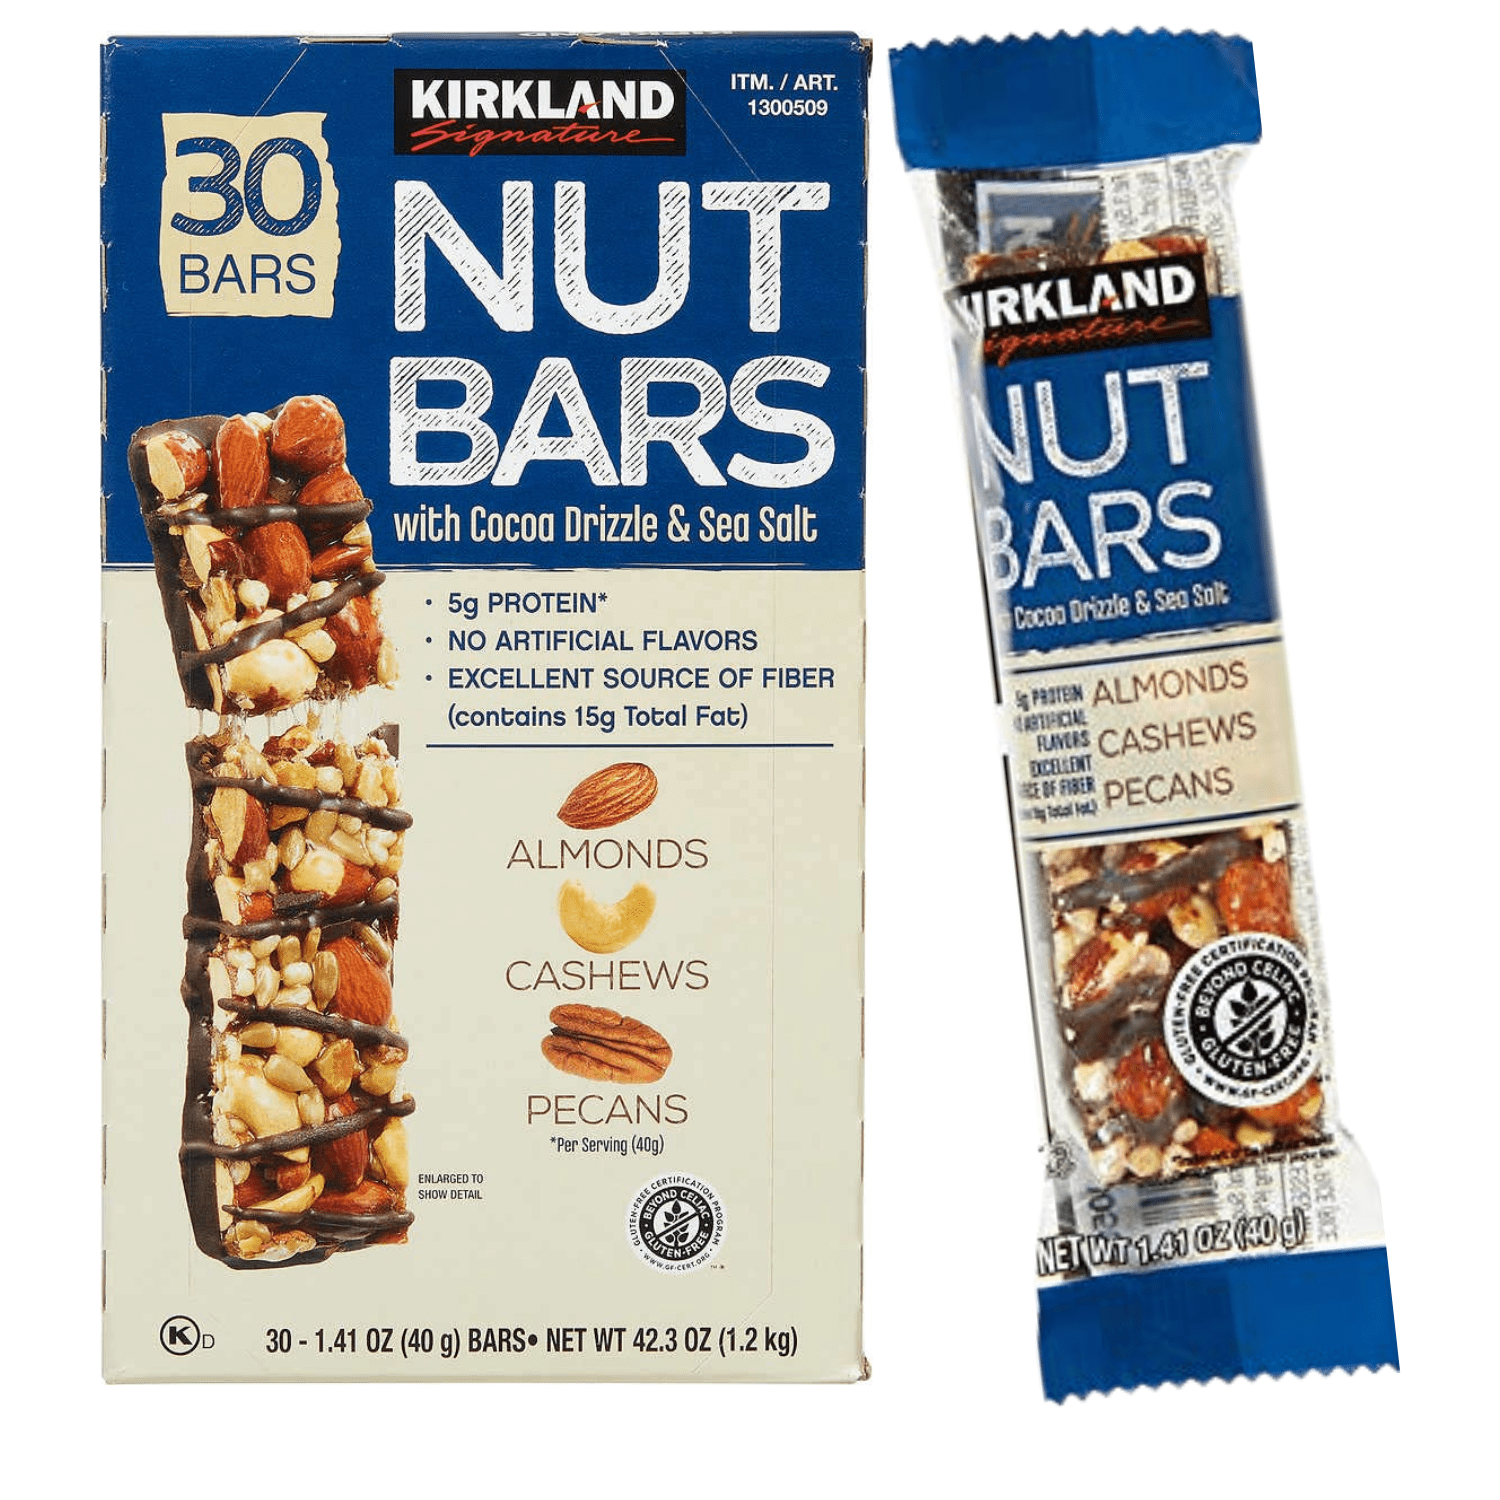 Kirkland Signature Nut Bars 40g with Cocoa Drizzle & Sea Salt 5g Protein  Almond Cashew & Pecans On the Go Lunch Box Ready to Eat Snack Bars 30 Count